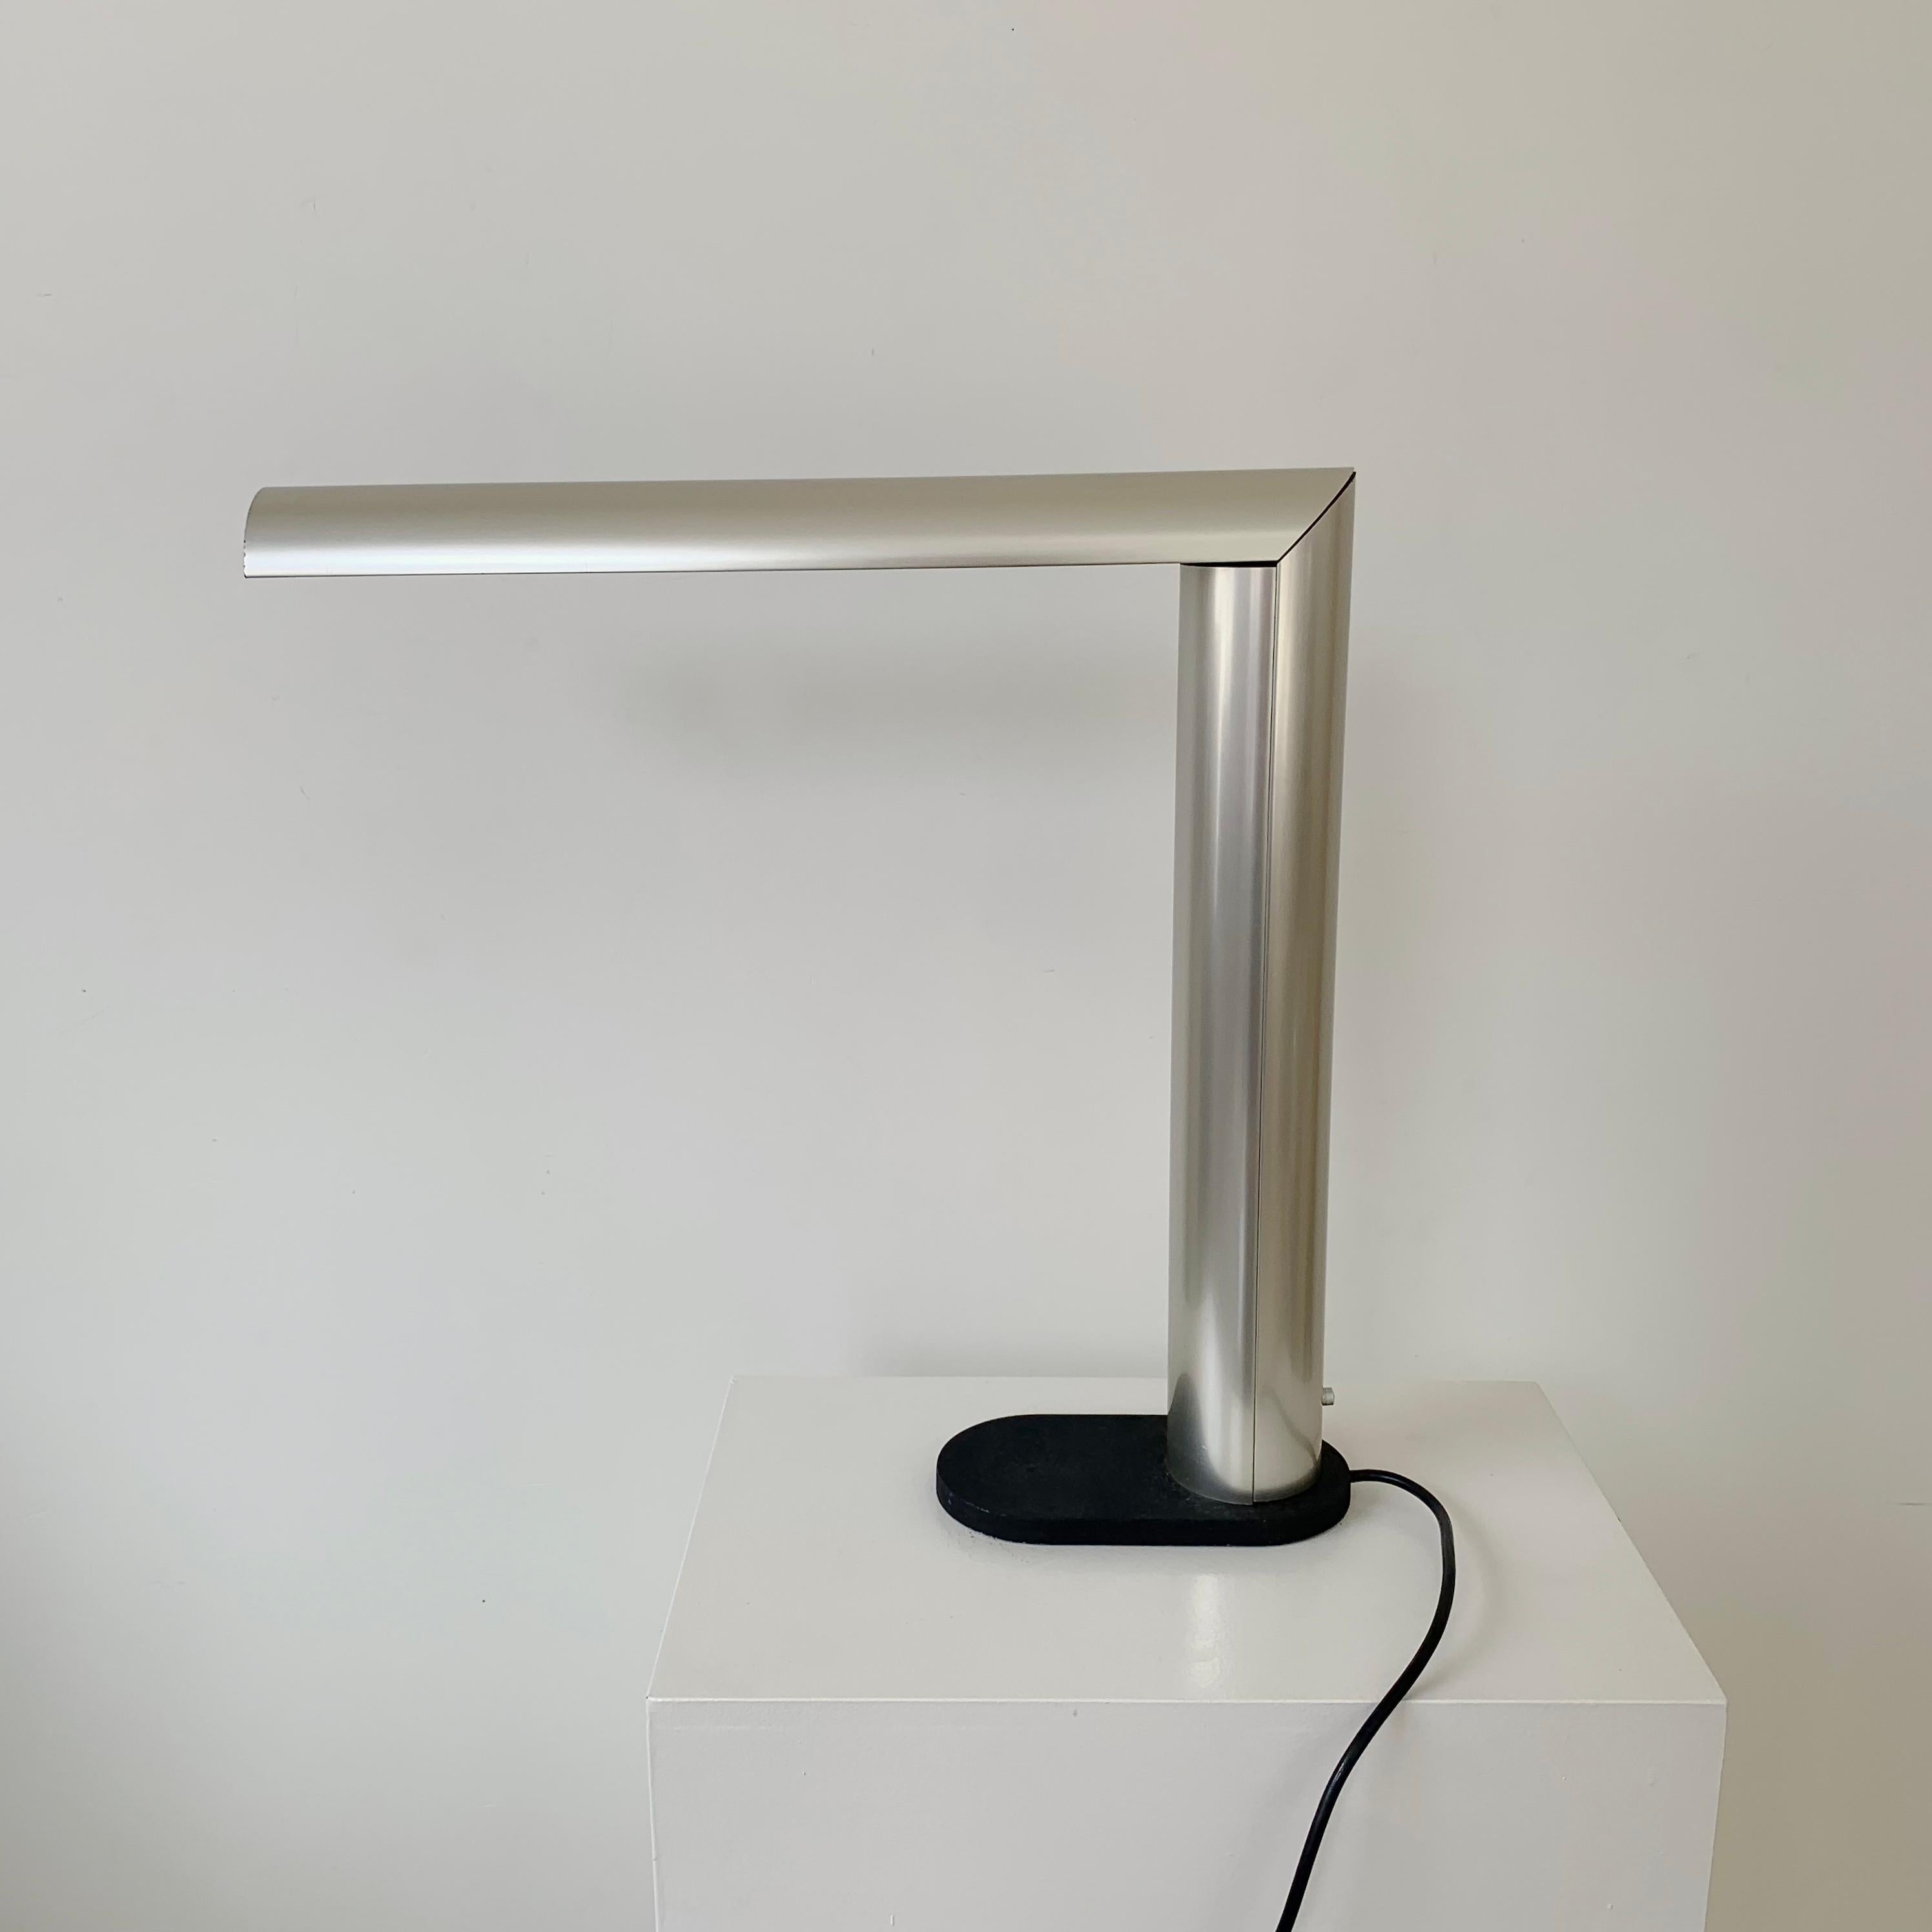 Sabine Charoy Desk Lamp, Edition Verre Lumiere, 1981, France In Good Condition For Sale In Brussels, BE